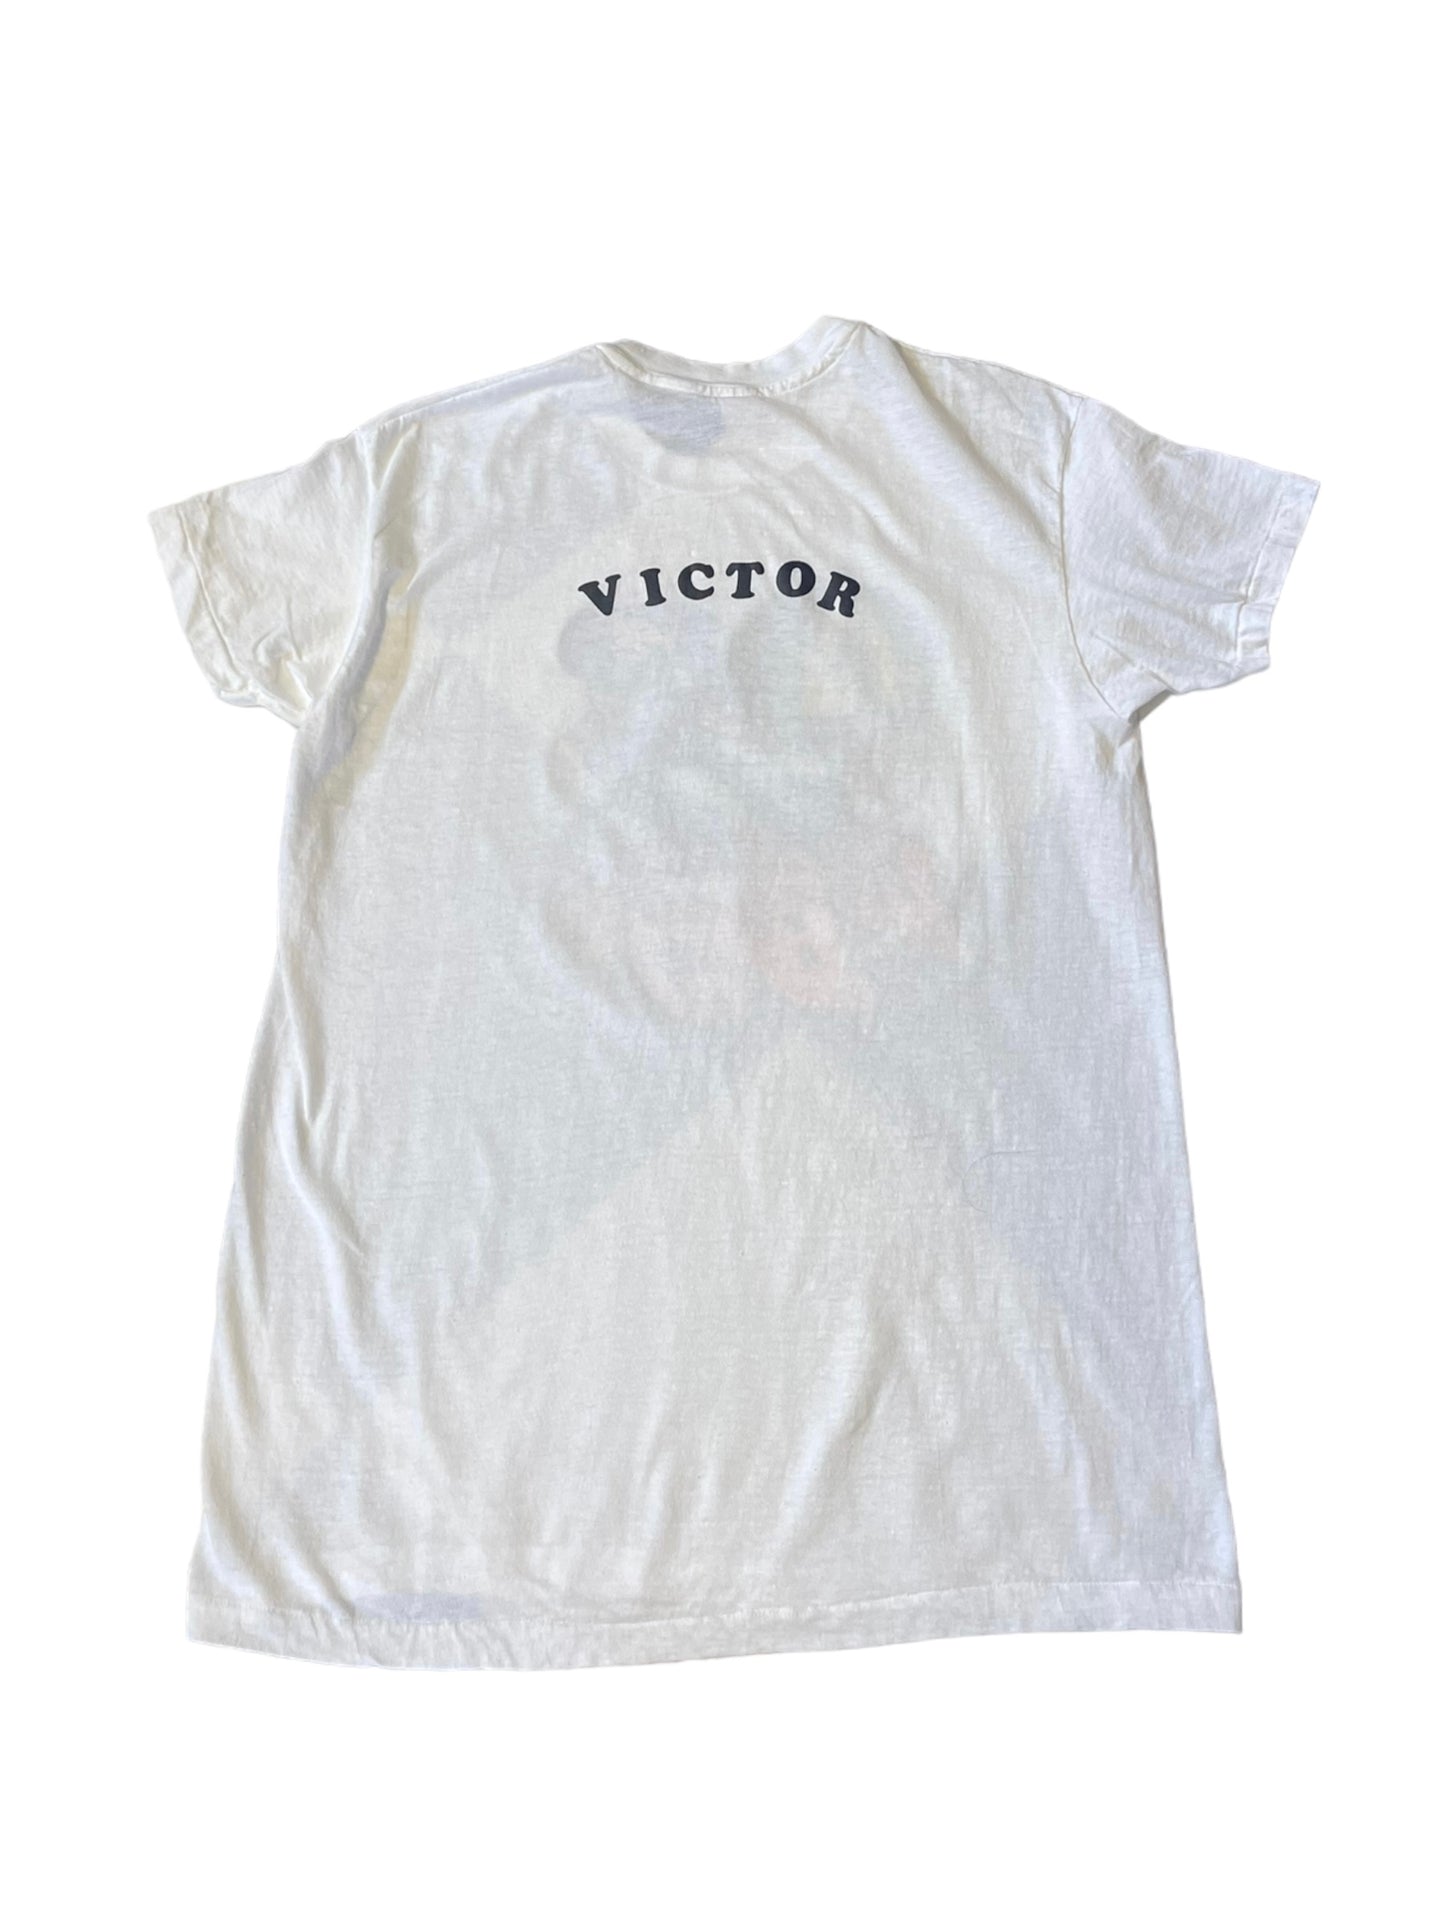 (L) 1979 Let’s Boogie “Victor” Double Sided Tee